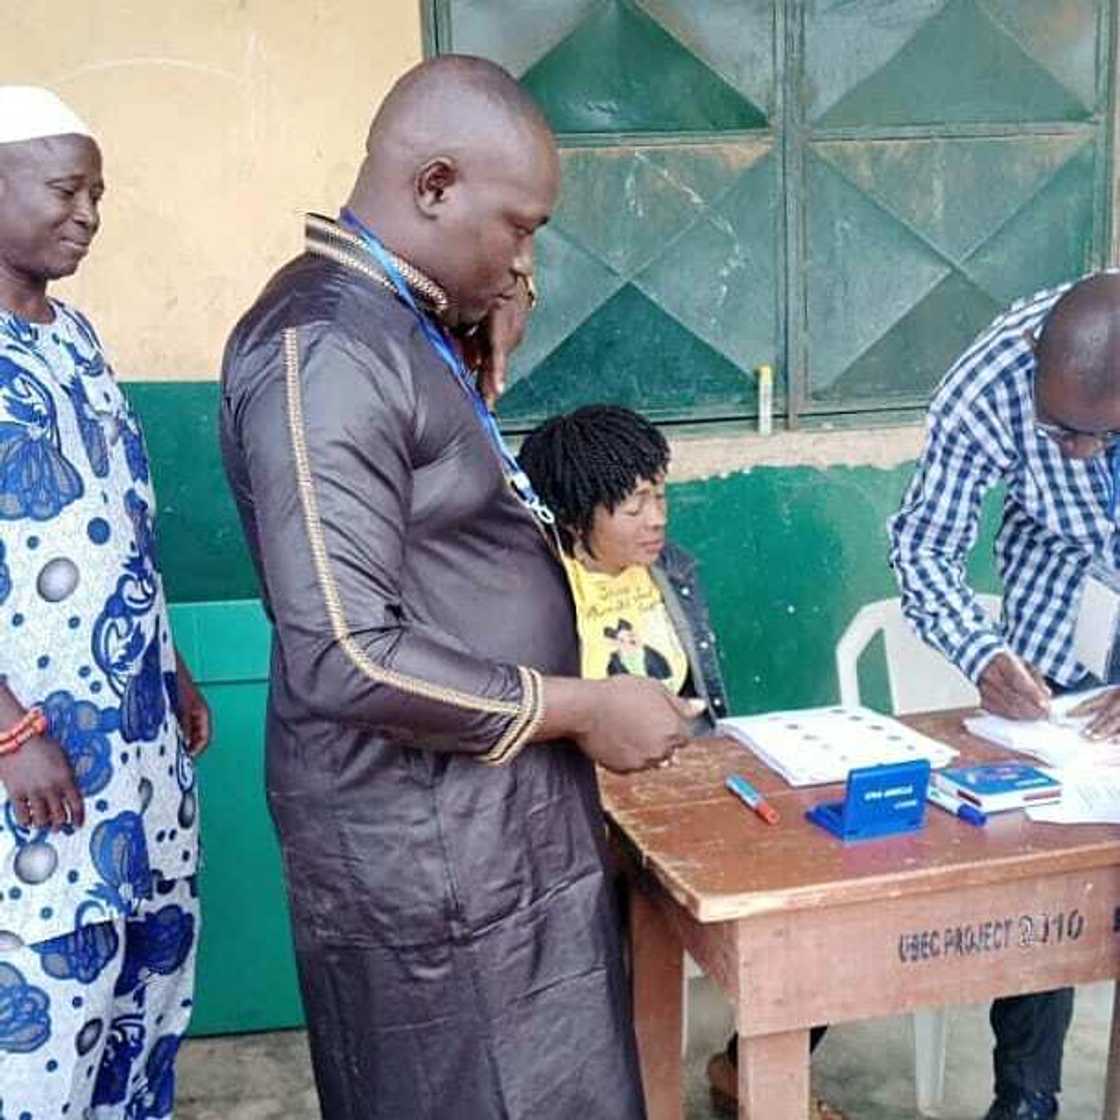 LG elections in ogun state